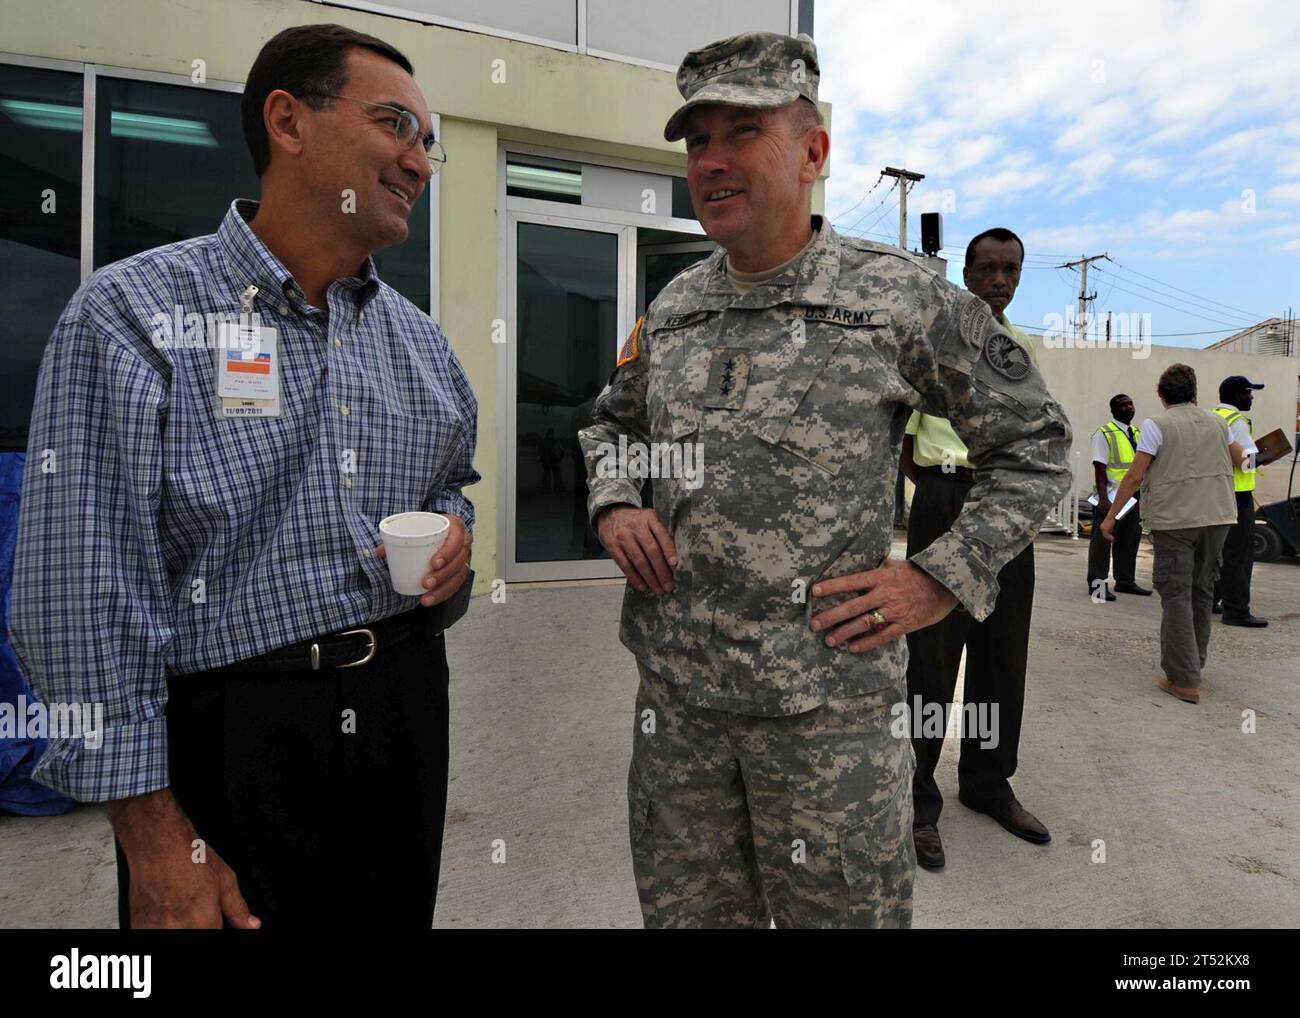 1002195961C-008 PORT-AU-PRINCE, Haiti (Feb. 19, 2010)  Art Torno, left, American Airlines Regional Director for the Caribbean,  speaks with Gen. Ken Keene, commanding general of Operation Unified Response, at Toussaint Louverture International Airport in Port-au-Prince, Haiti.  American Airlines is the first commercial airline to resume flights into Haiti since a 7.0 magnitude earthquake caused severe damage in and around Port-au-Prince Jan. 12.  Navy Stock Photo